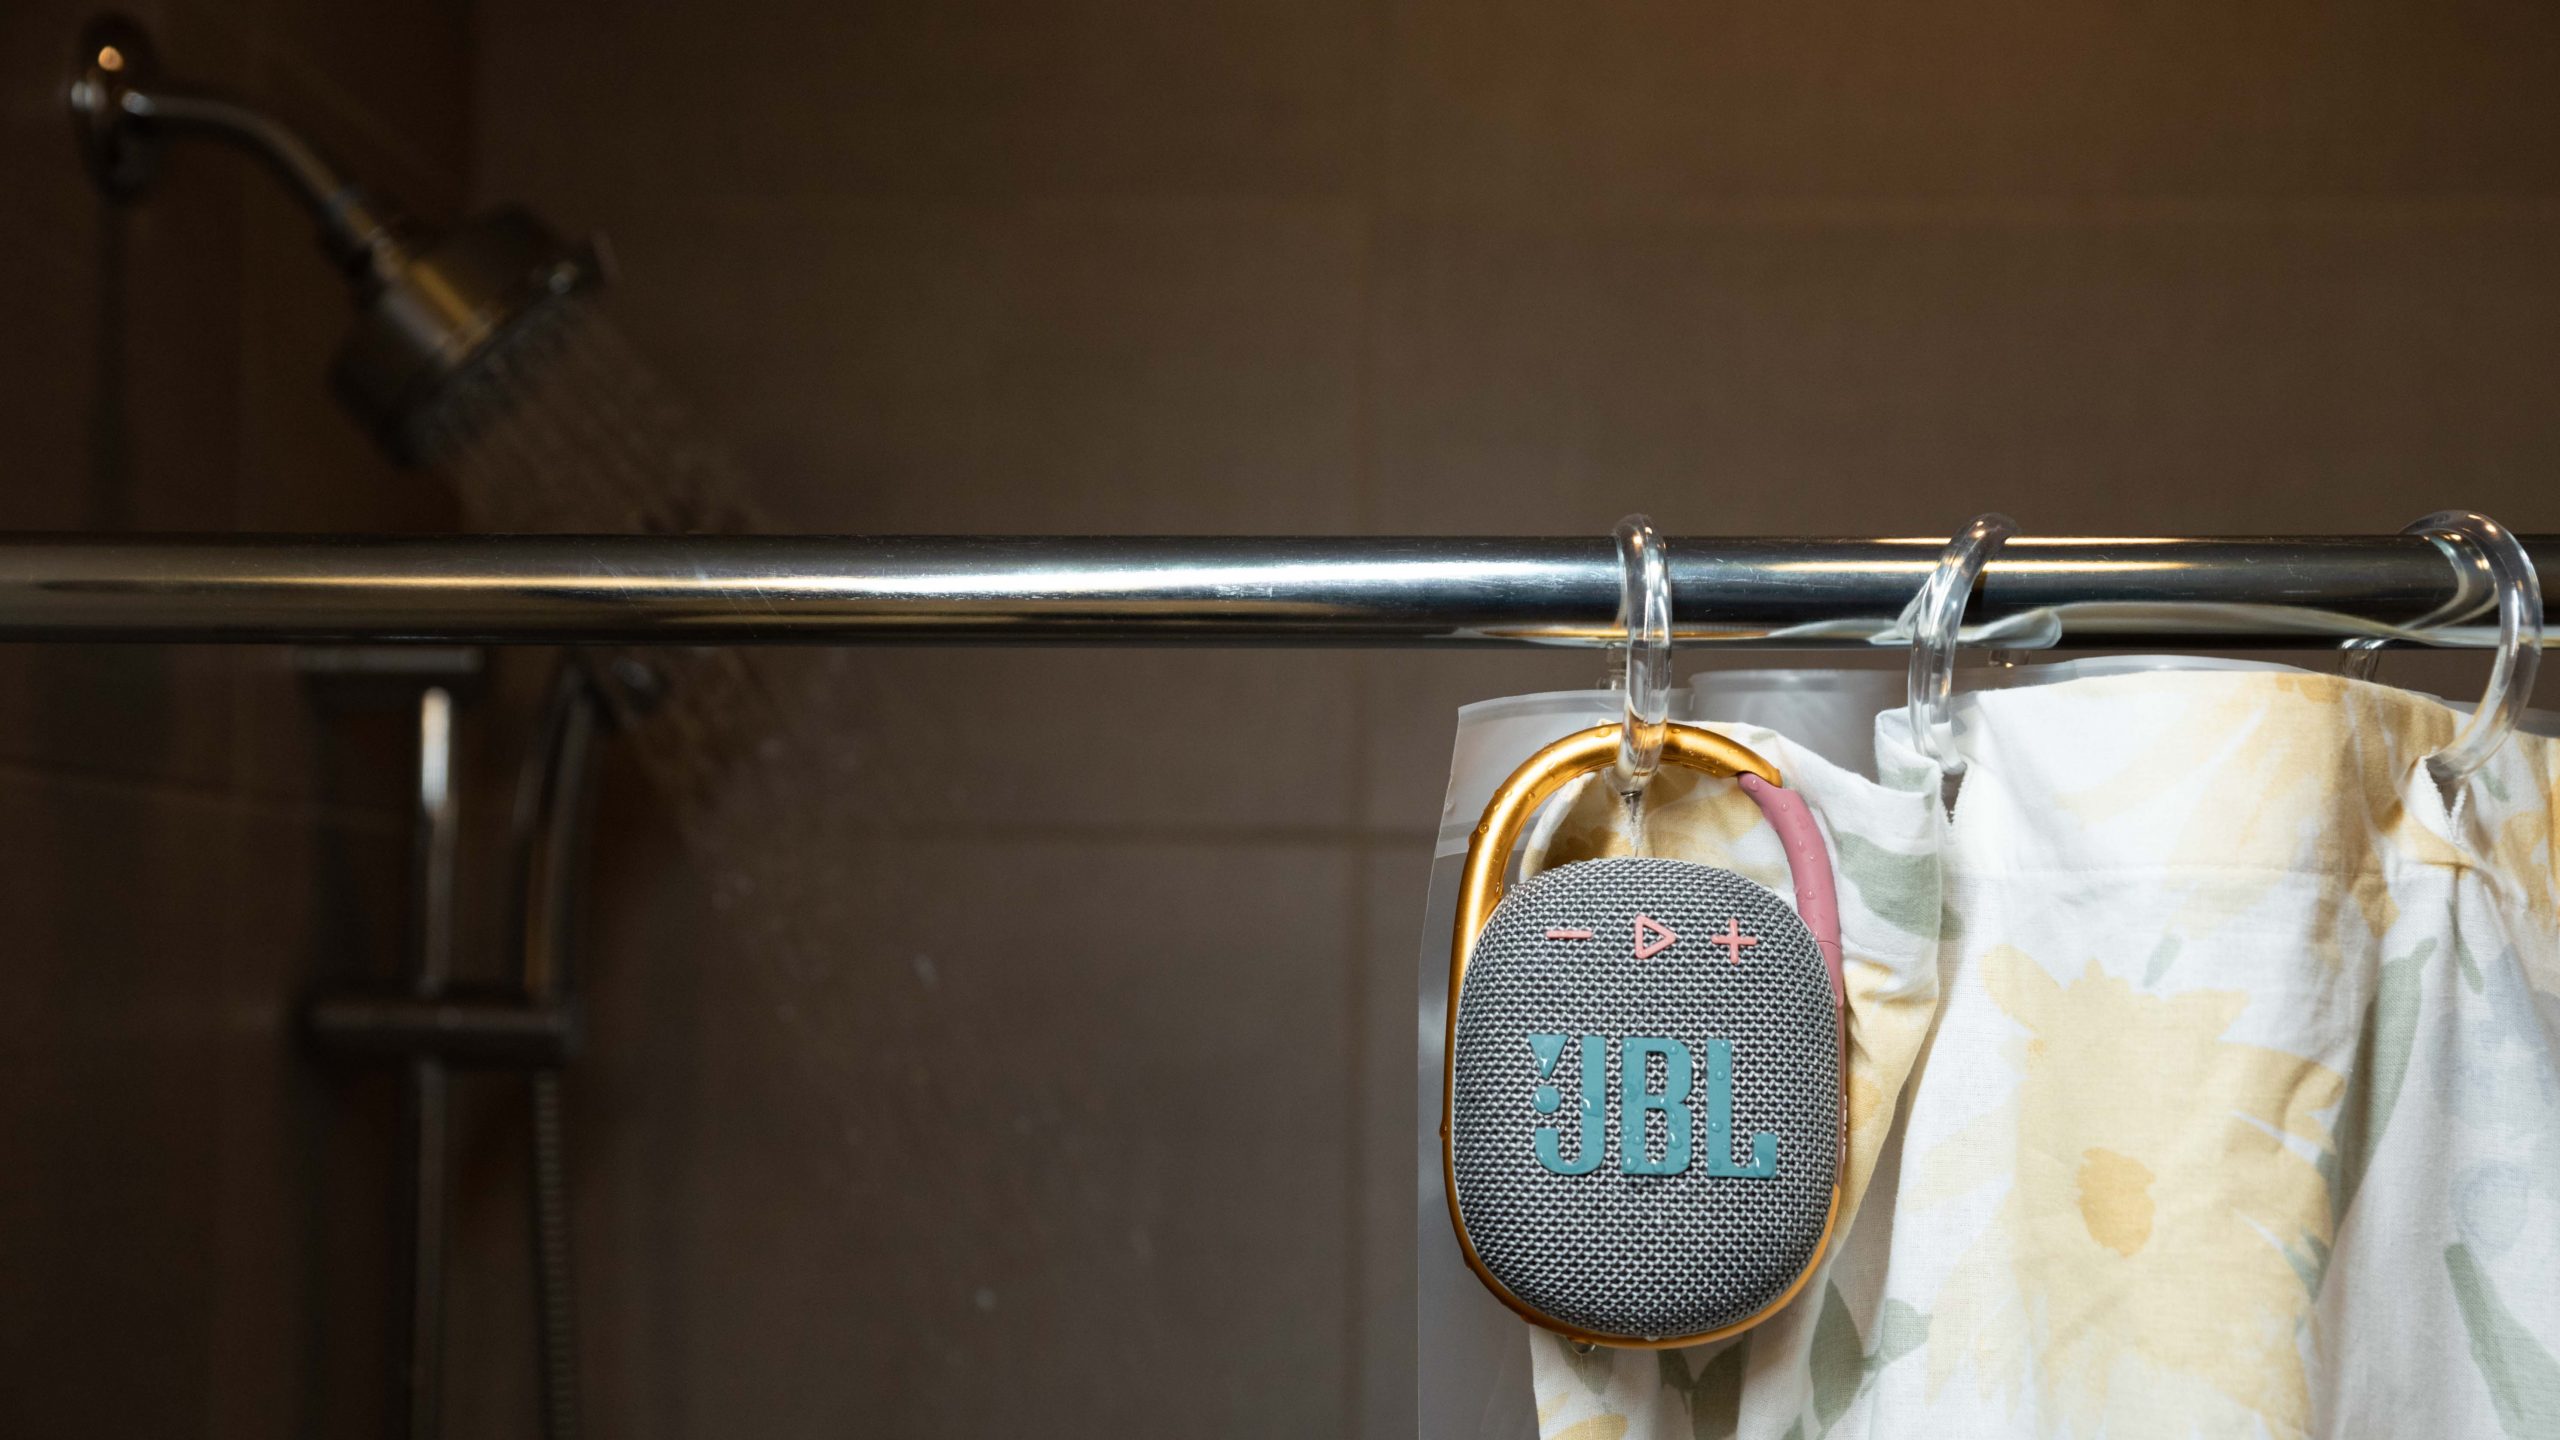 The JBL Clip 4 Bluetooth speaker hands from a shower rod in front of a shower curtain and running shower head.